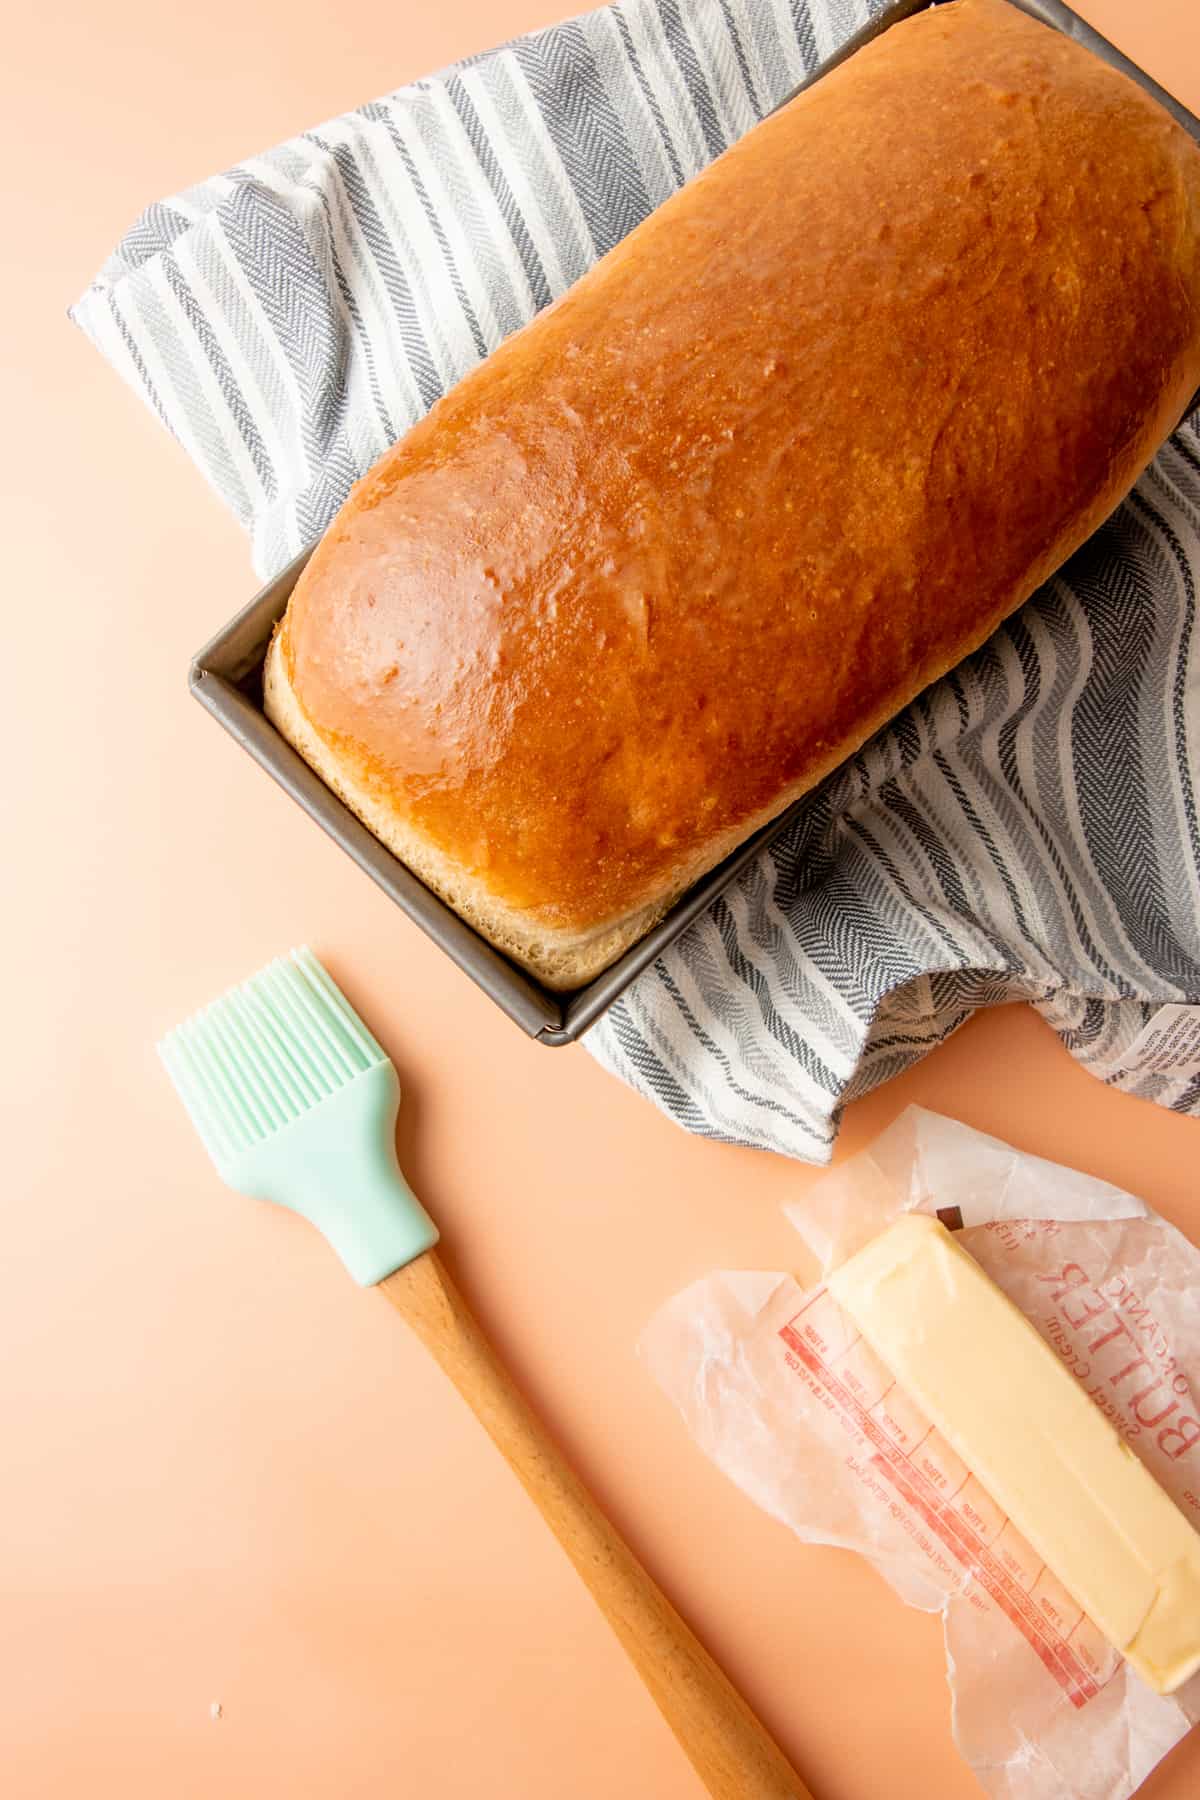 A brush brushes butter on a baked loaf of bread.